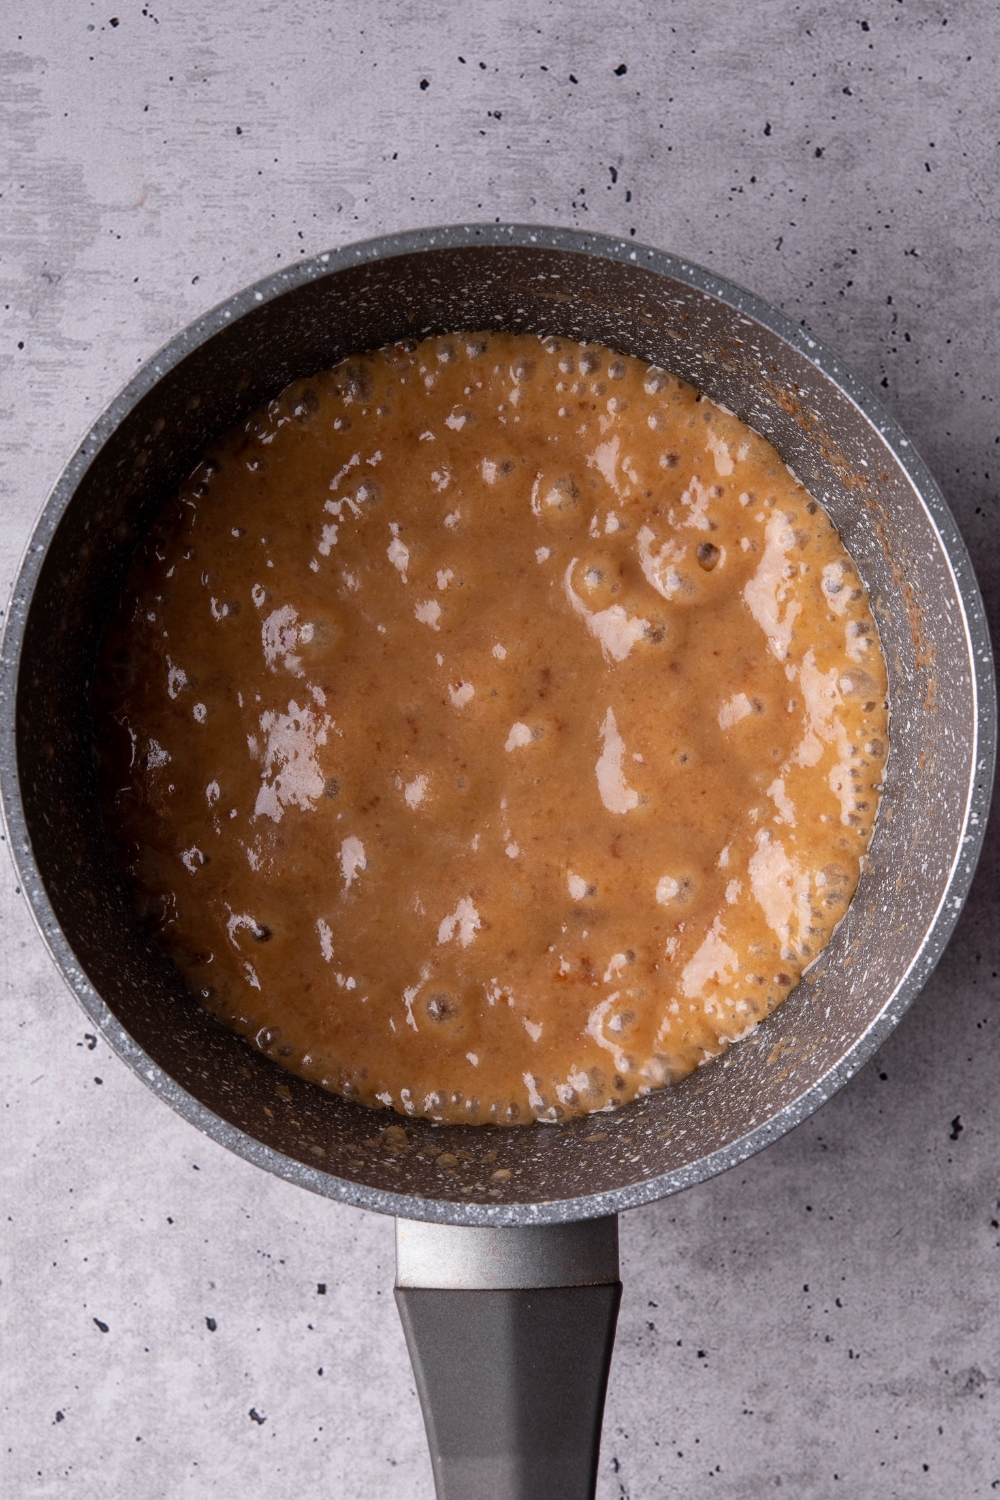 A saucepot with caramel being cooked.